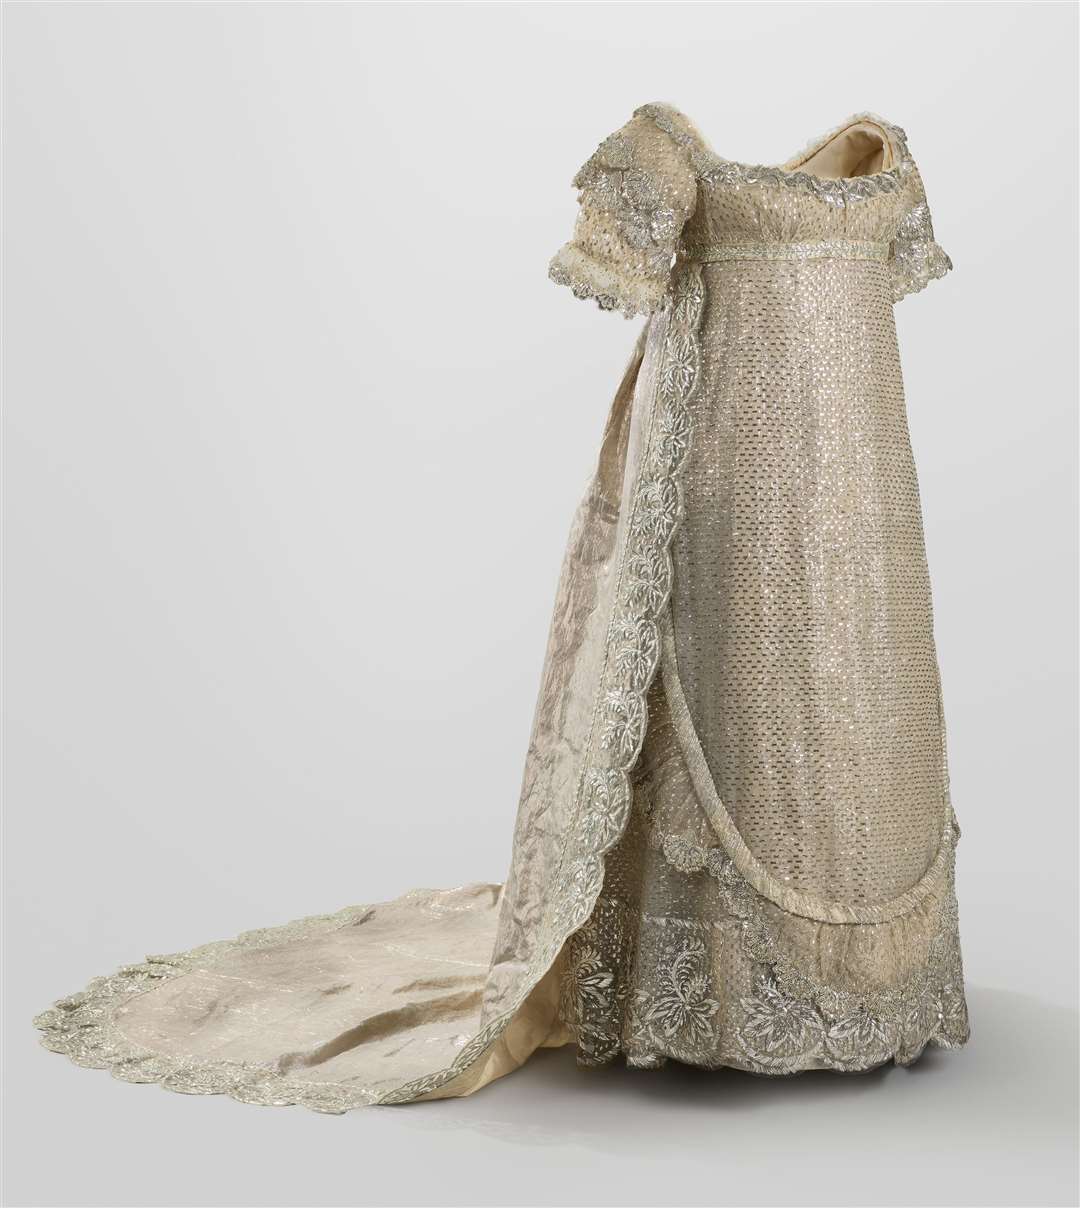 The wedding dress of George IV’s daughter Princess Charlotte of Wales (Royal Collection Trust/HM King Charles III/PA)